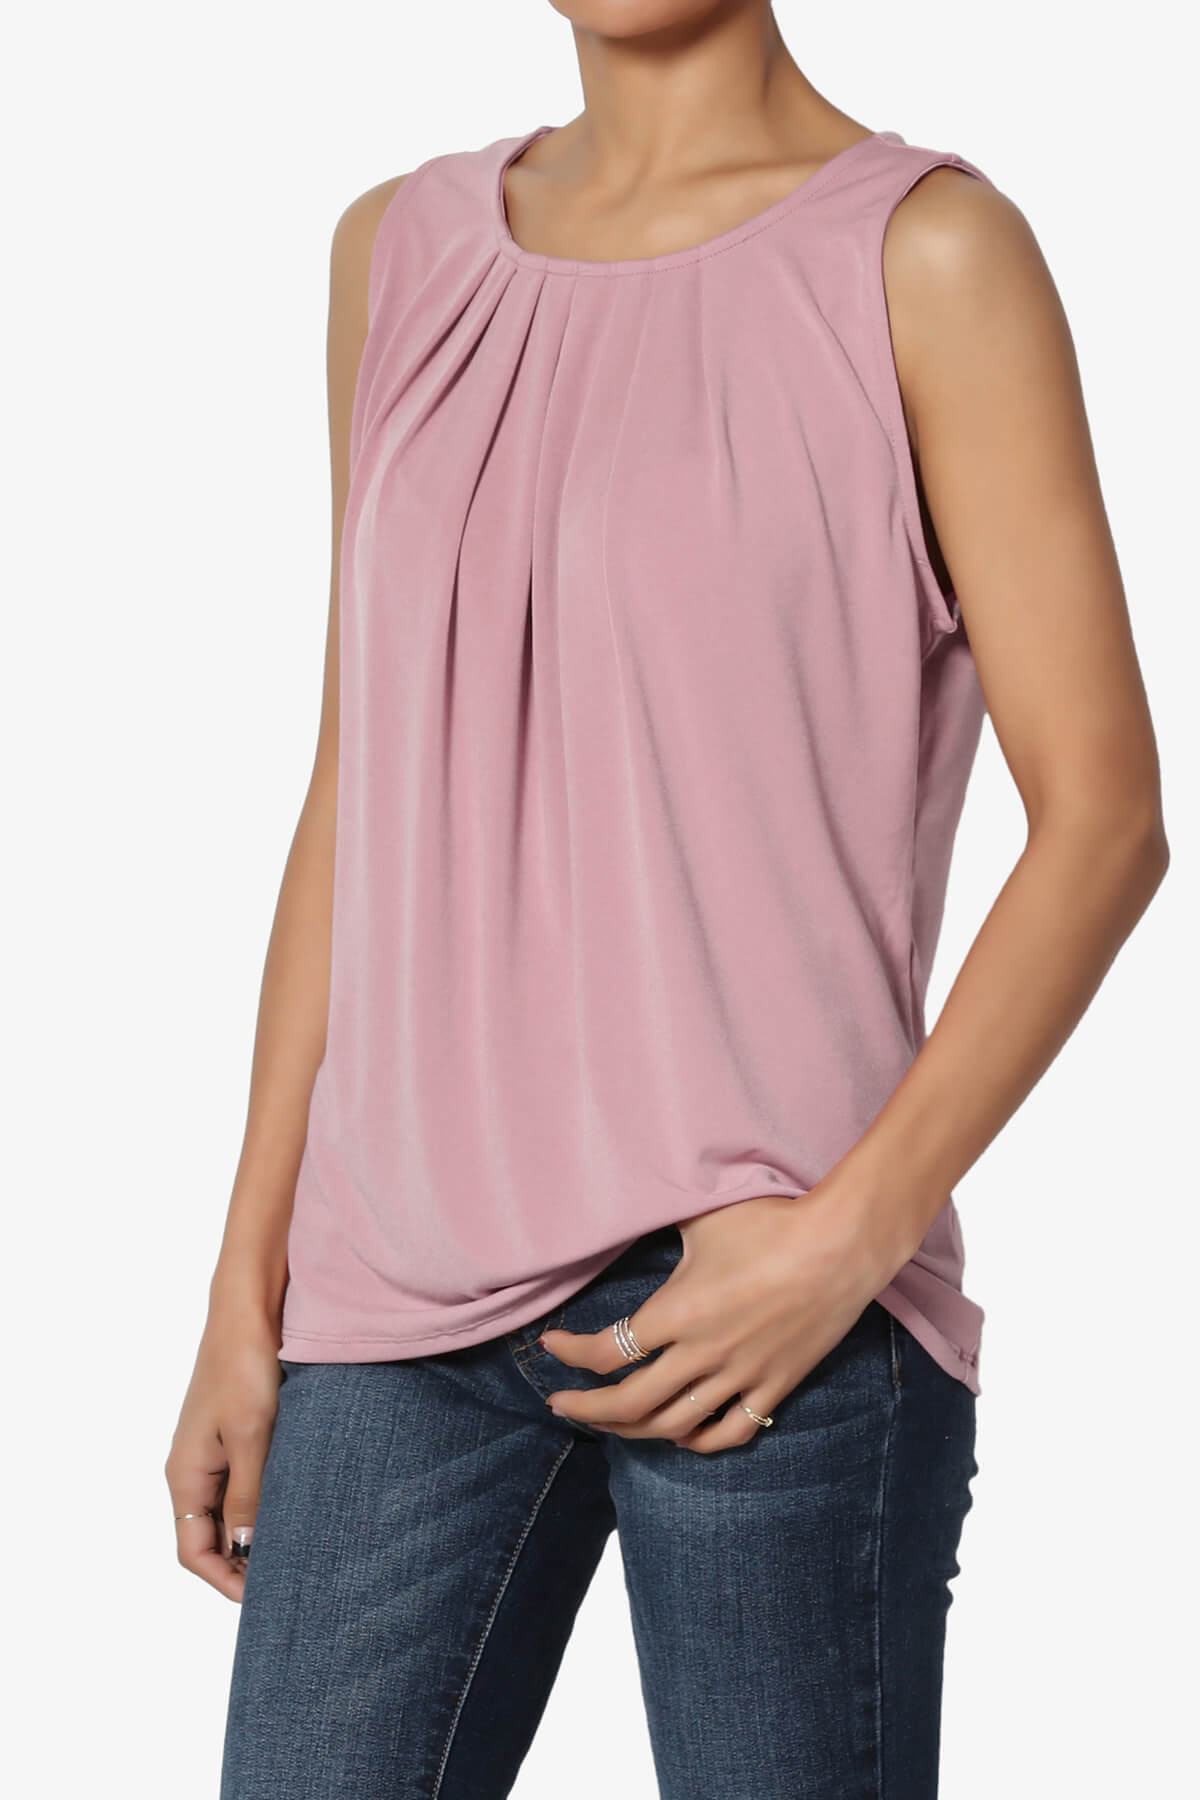 Load image into Gallery viewer, Chaffee Pleat Neck Tank Top LIGHT ROSE_3
